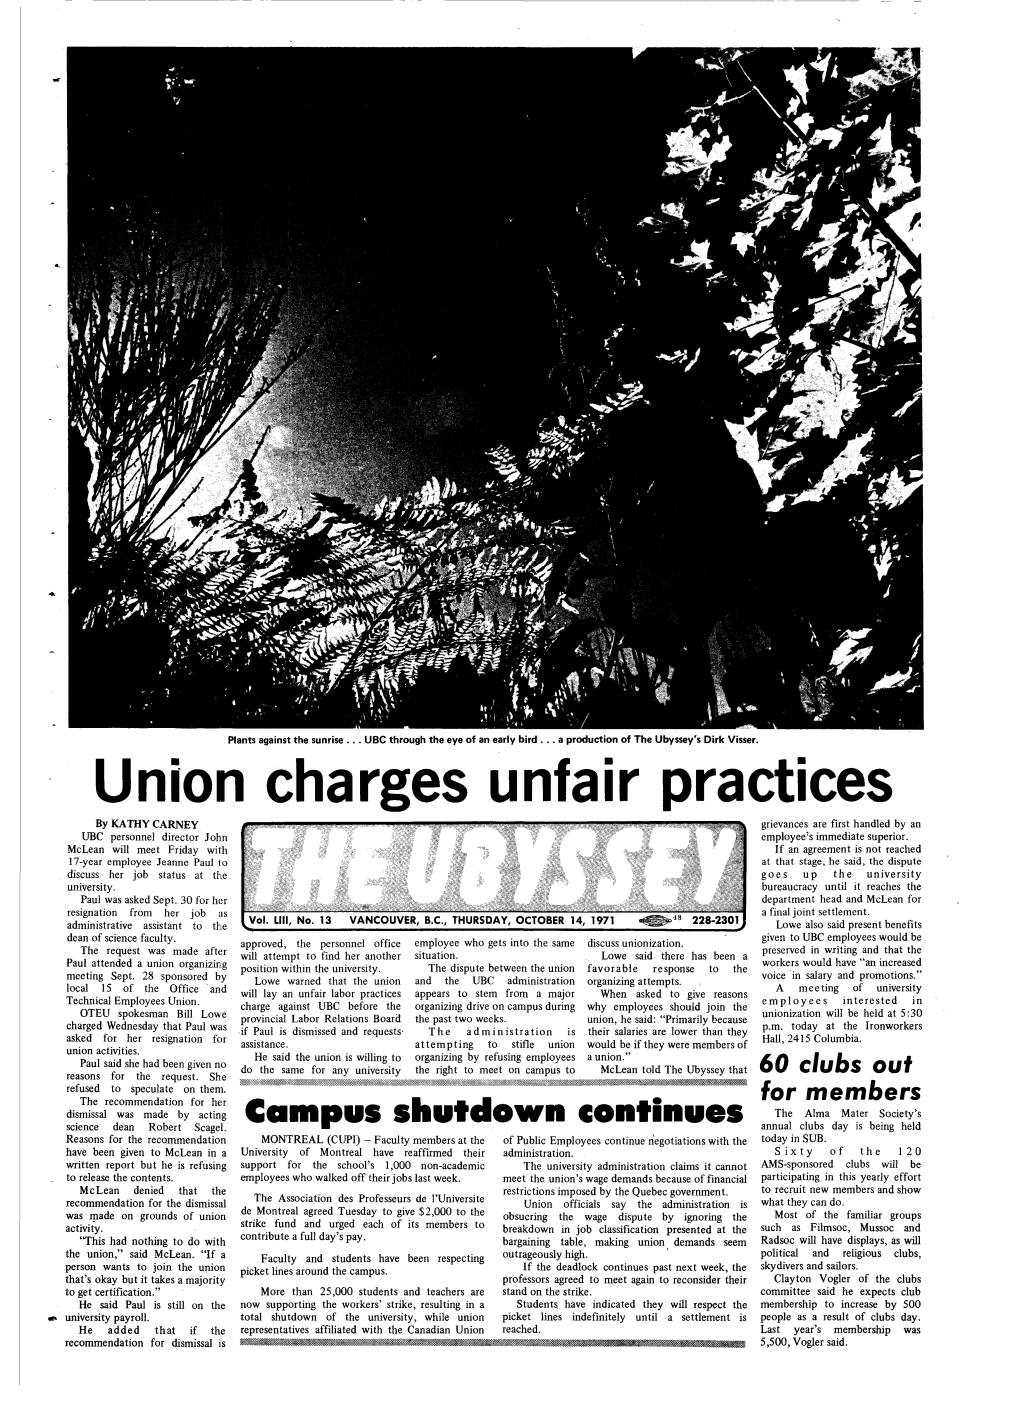 Union Charges Unfair Practices by KATHY CARNEY Grievances Are First Handled by an UBC Personnel Director John Employee's Immediate Superior